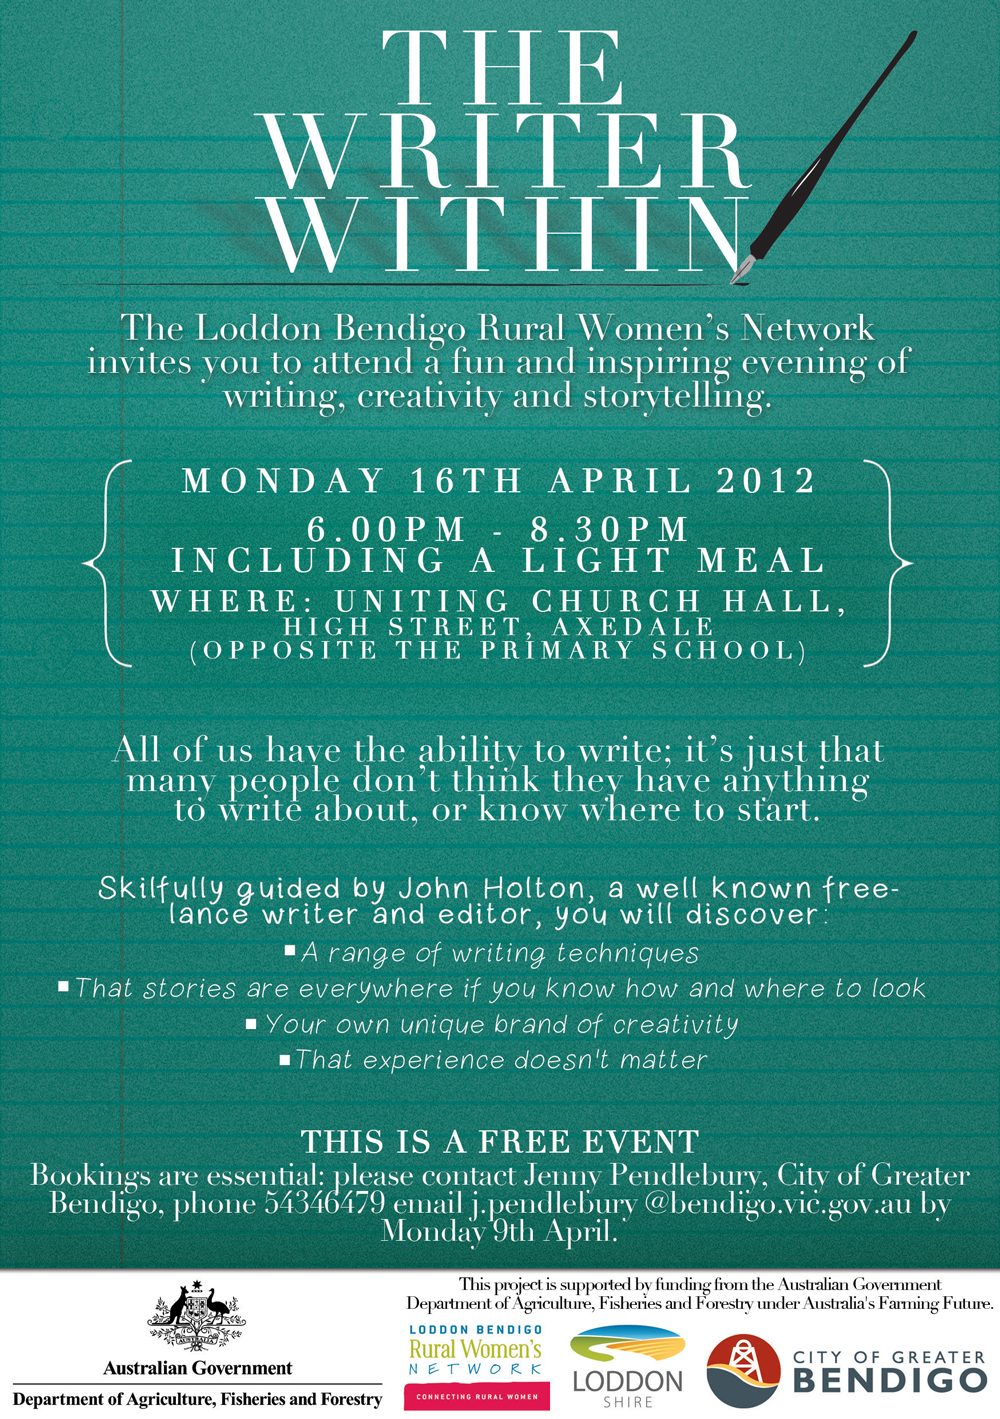  Flyer to promote local writers evening.&nbsp; 